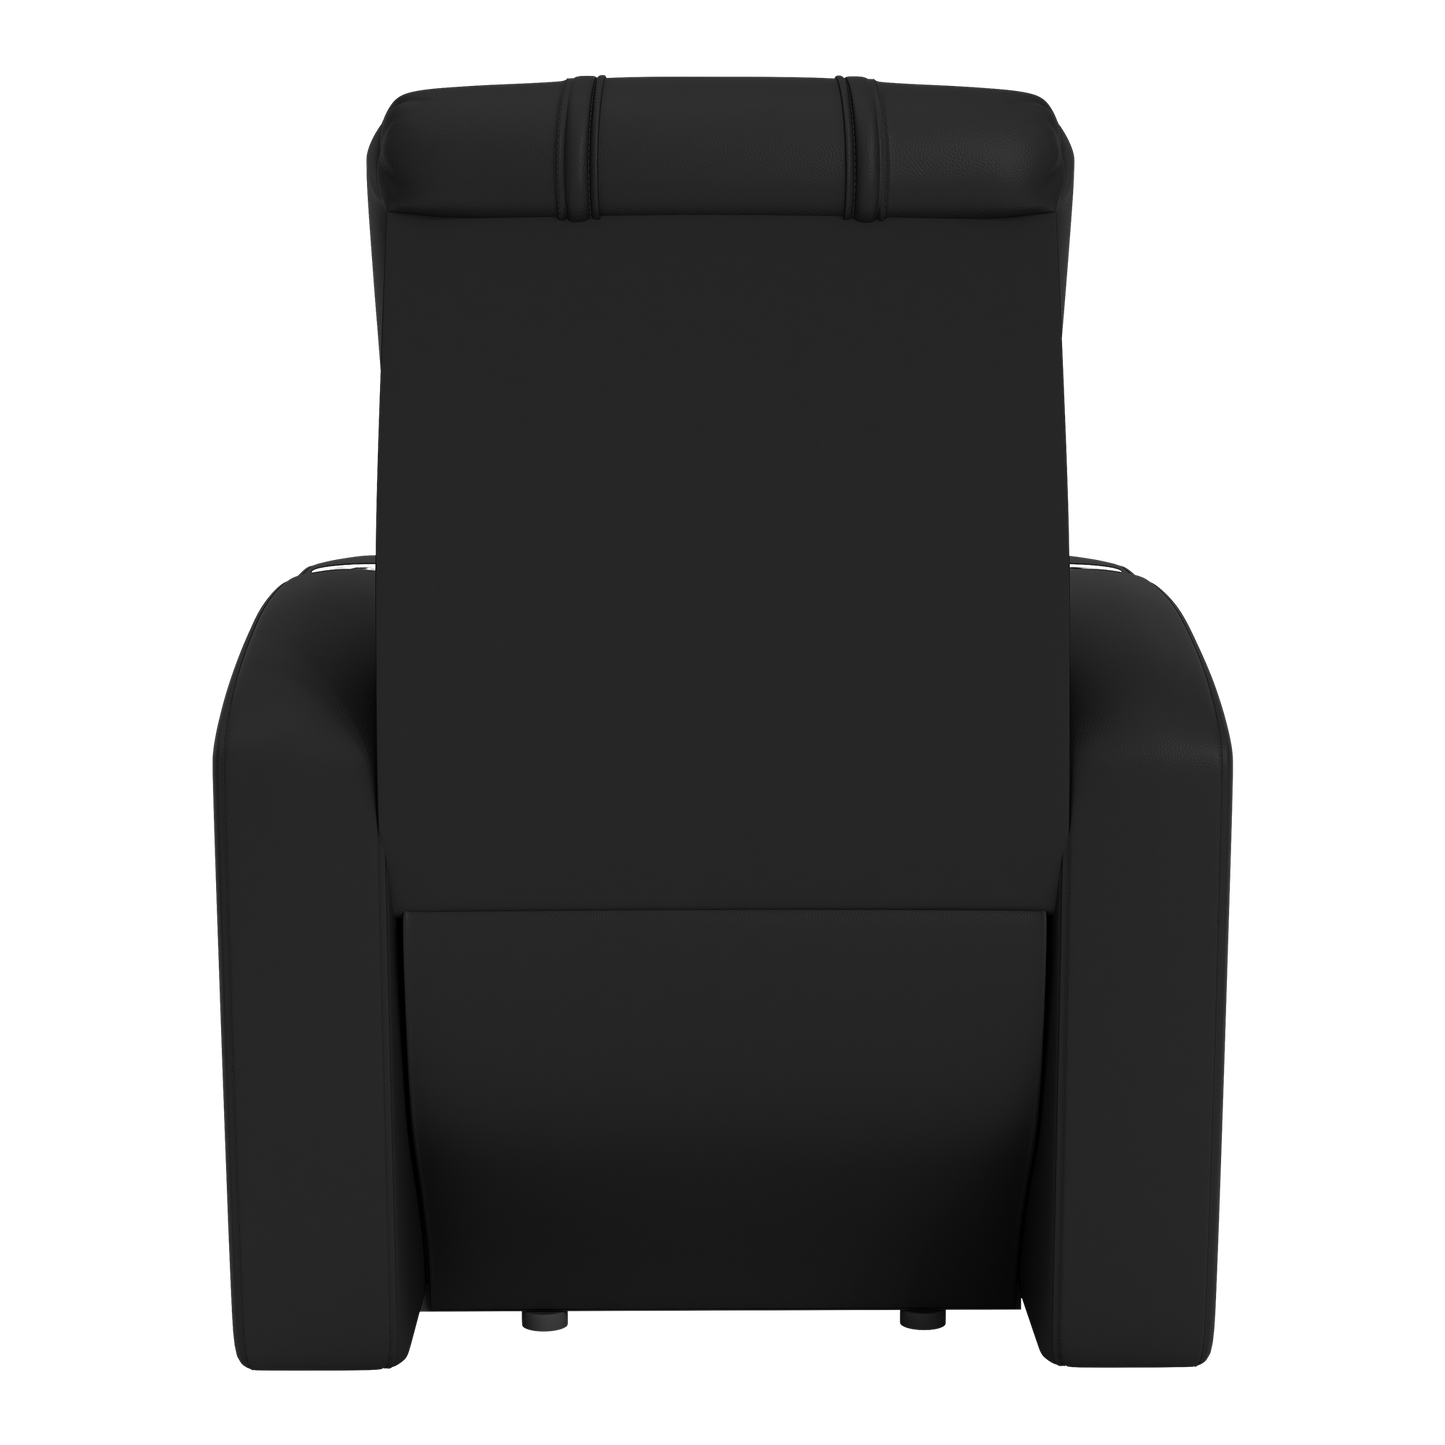 Stealth Recliner with Atlanta Falcons Classic Logo